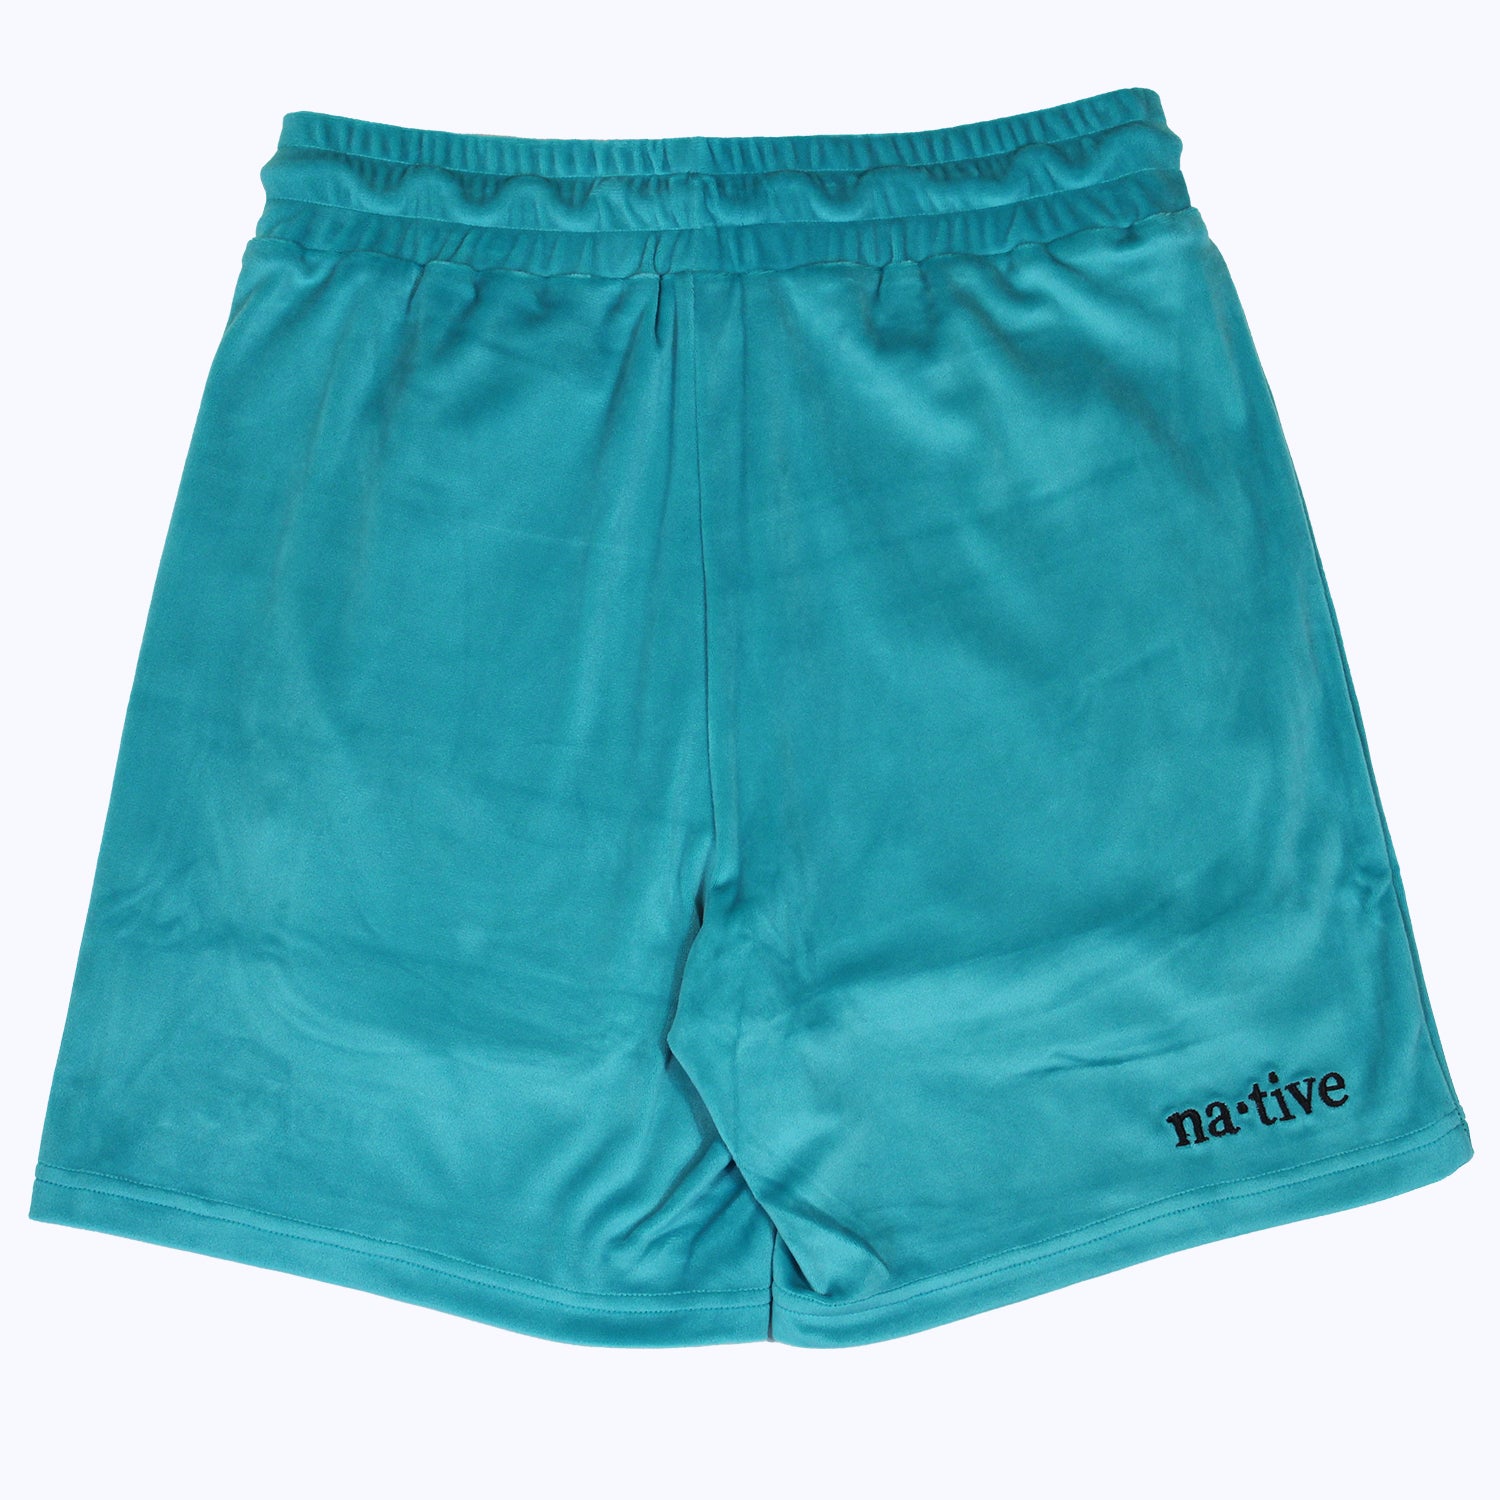 velour shorts in turquoise